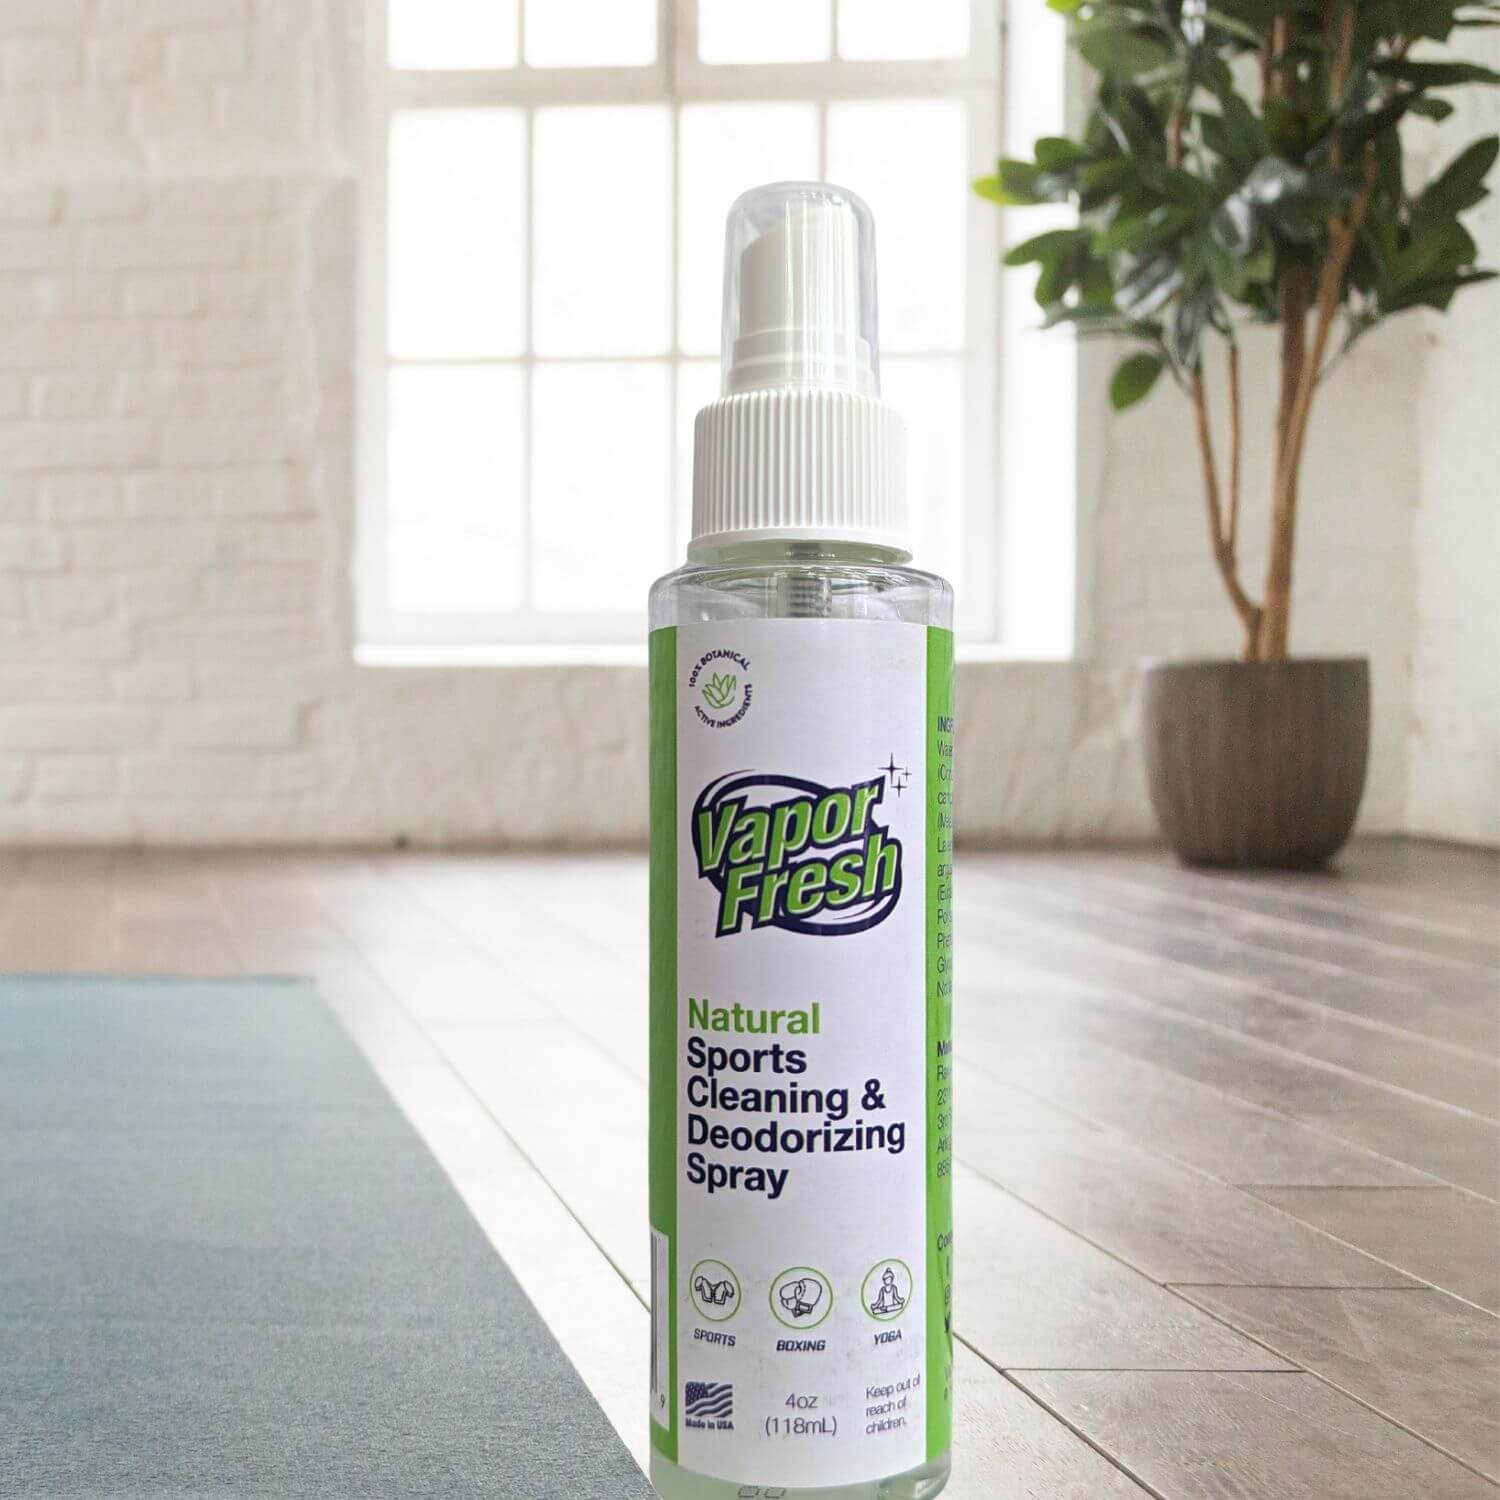 Vapor Fresh Multi-Surface Cleaning Wipes